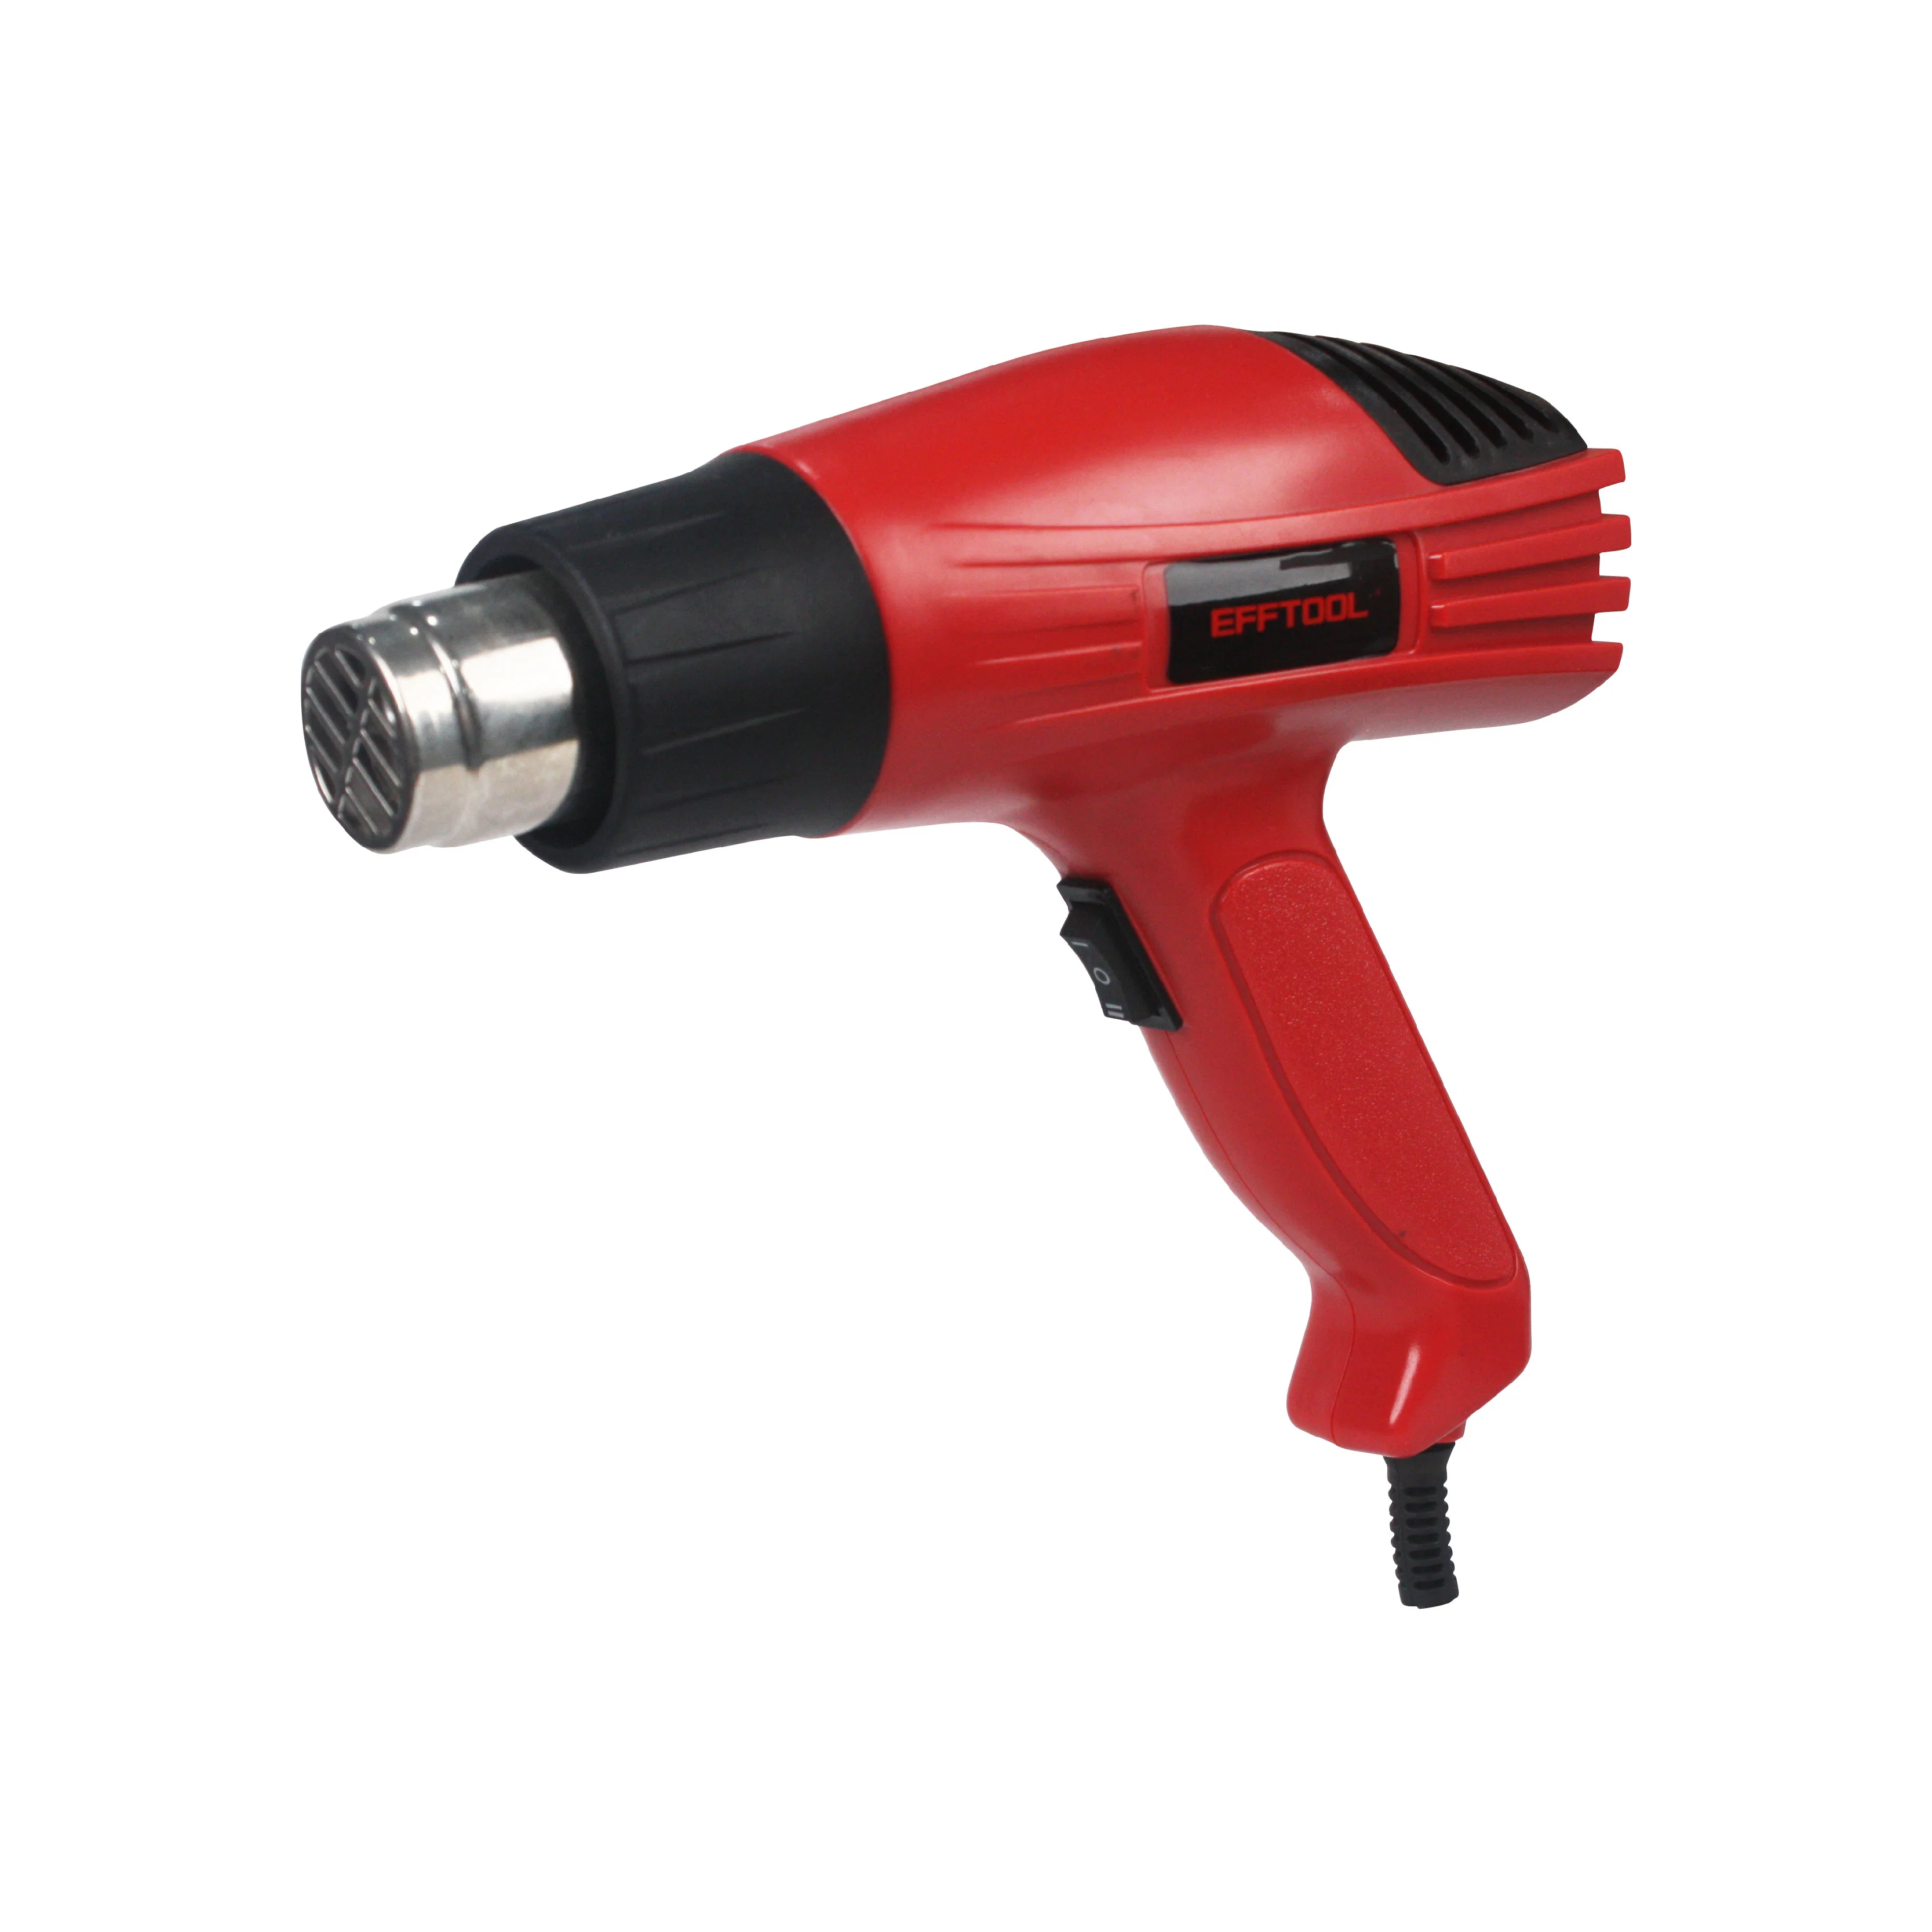 2000W Double Heating Core Variable Two Kind Thermostatic Heat Gun Hot Air Gun